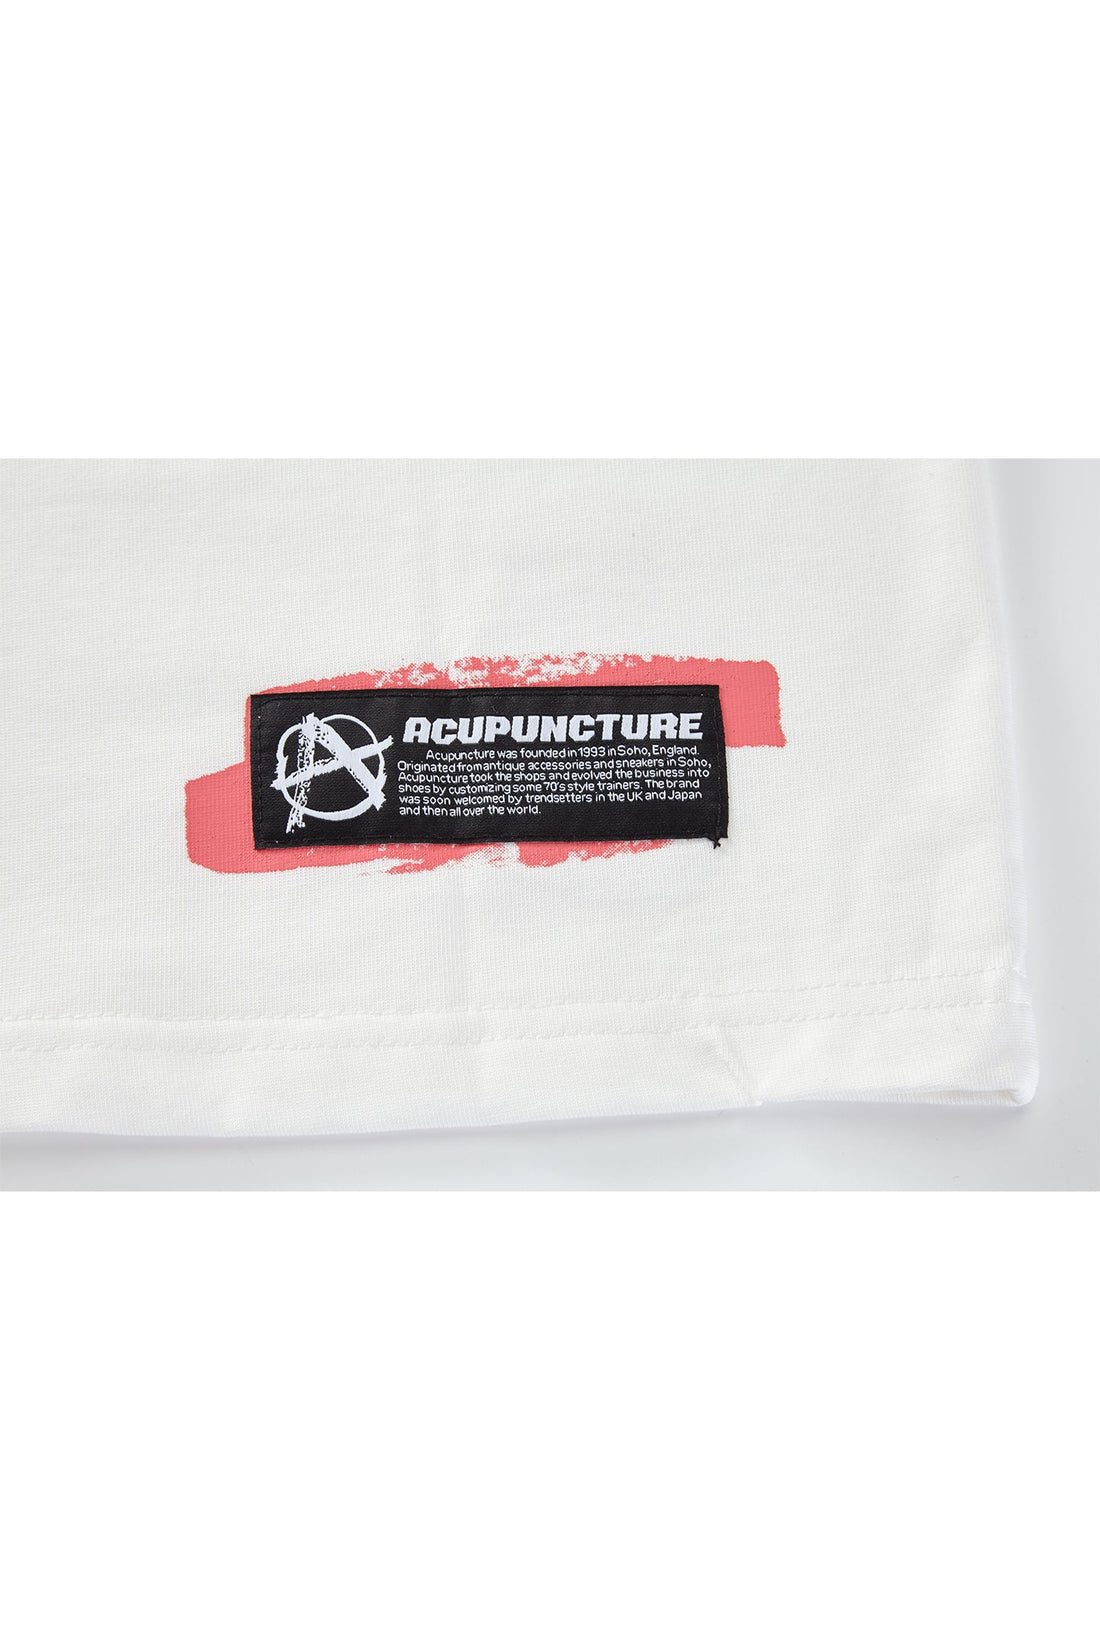 PROHIBITED SIGN TSHIRT WHITE Acupuncture